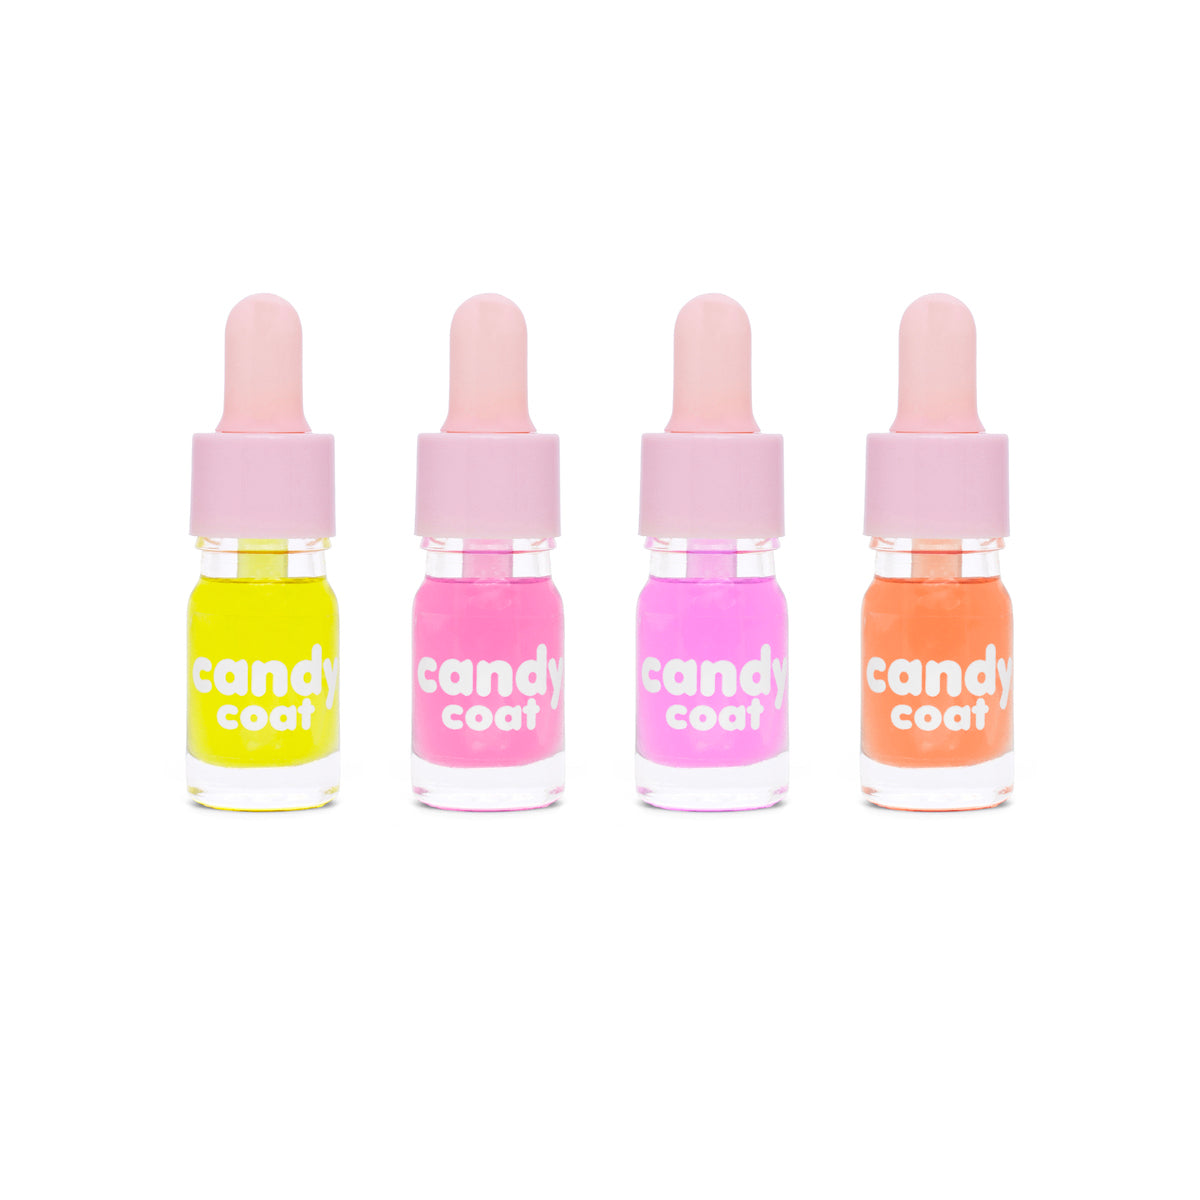 Candy Coat - Create and Sell your own cutie-glaze